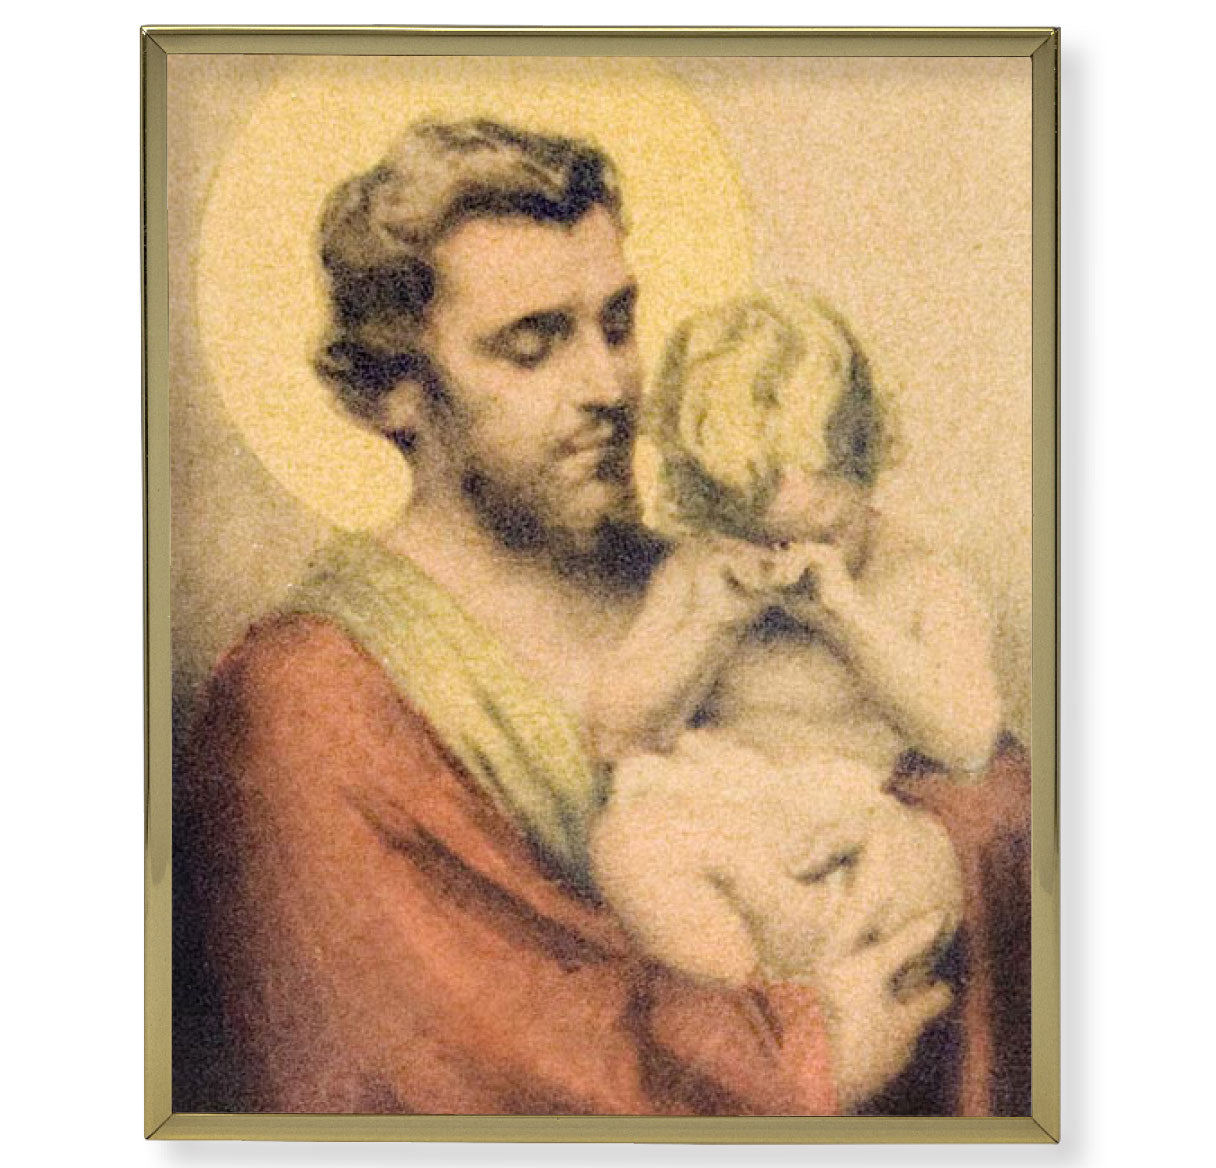 St. Joseph with Crying Jesus Gold Framed Plaque Art